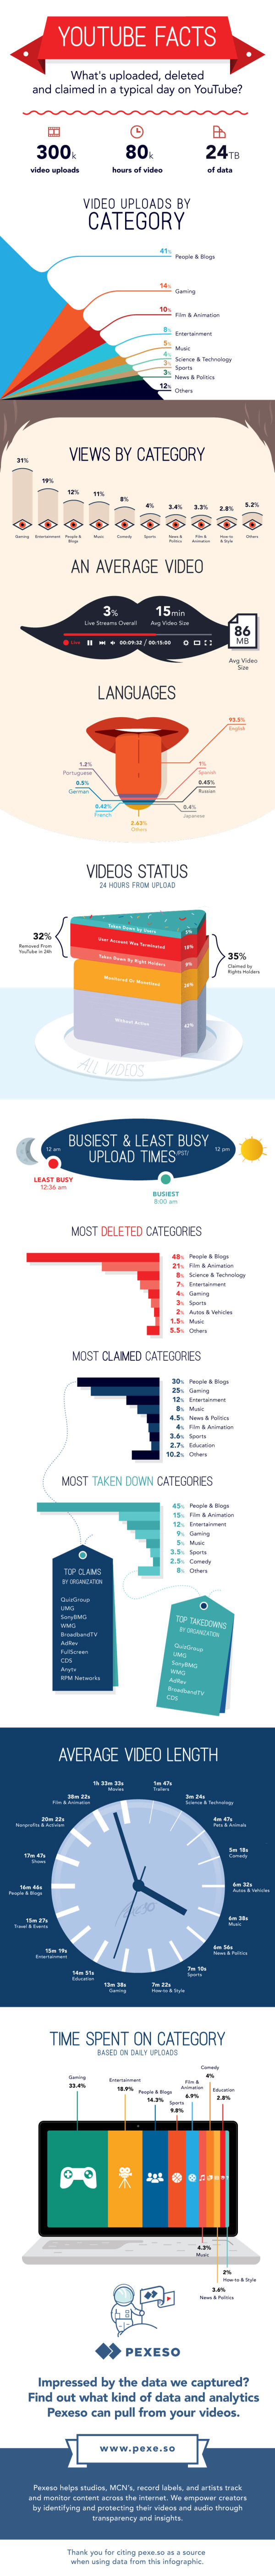 What Happens On YouTube in 24 Hours? infographic